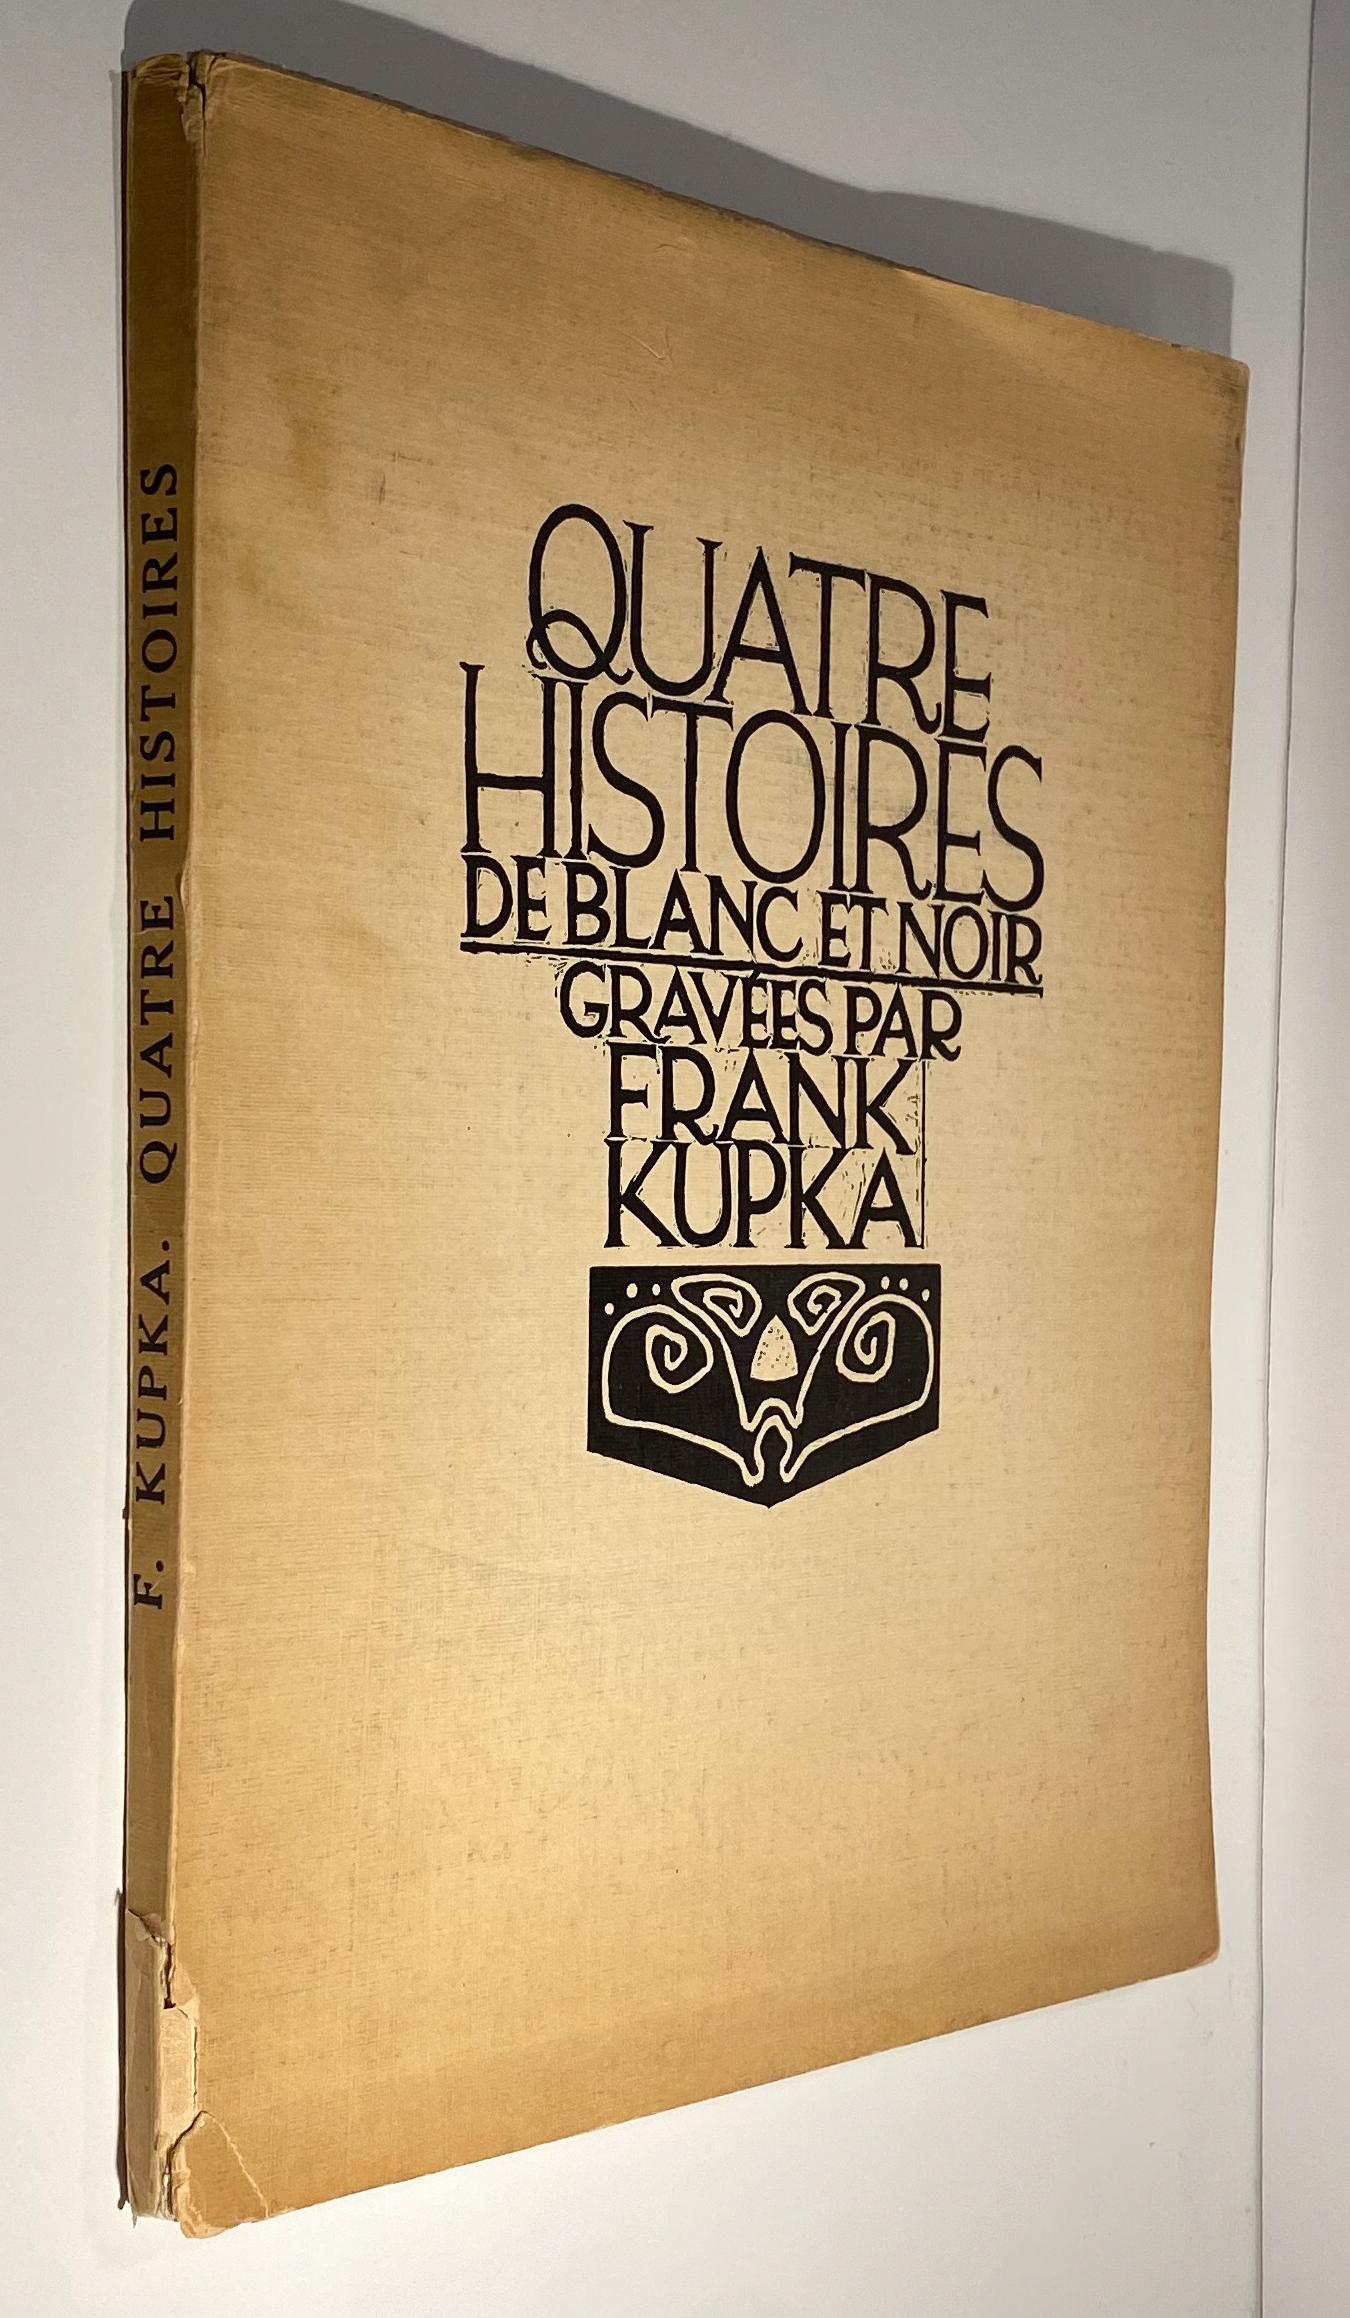 Quatre Histoires de Blanc et Noir, a book by Frantisek Kupka comprising title page with small woodcut, two leaves of text (one in English, one in French), 25 woodcuts on wove paper numbered 2-26 by Kupka, a colophon with publisher's information, and